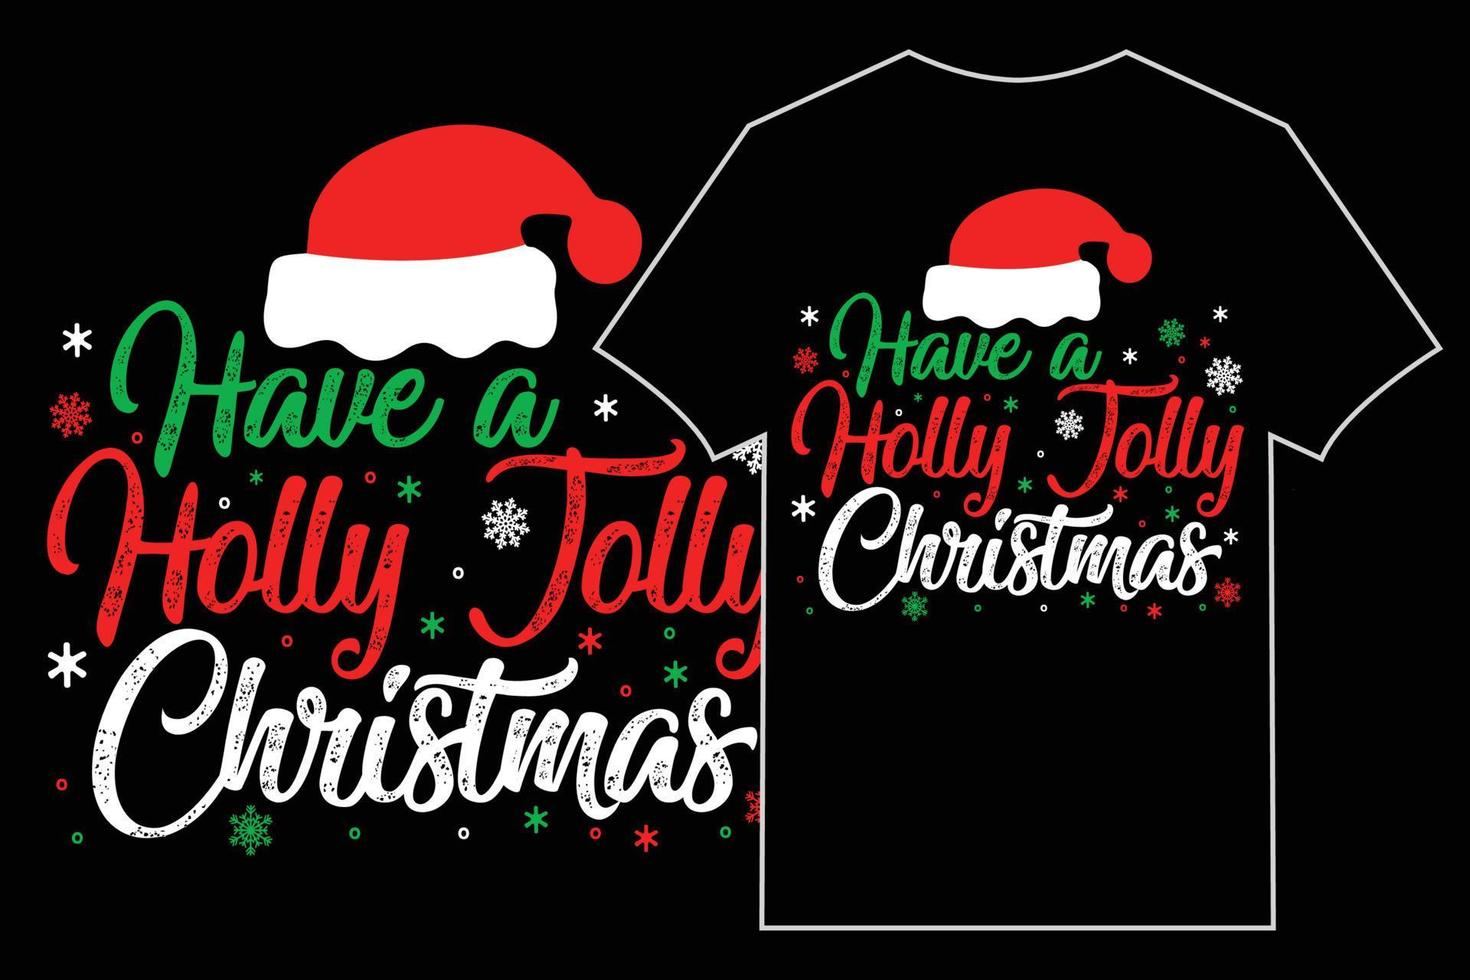 Christmas typographic T-Shirt vector. Have a holly jolly Christmas. vector